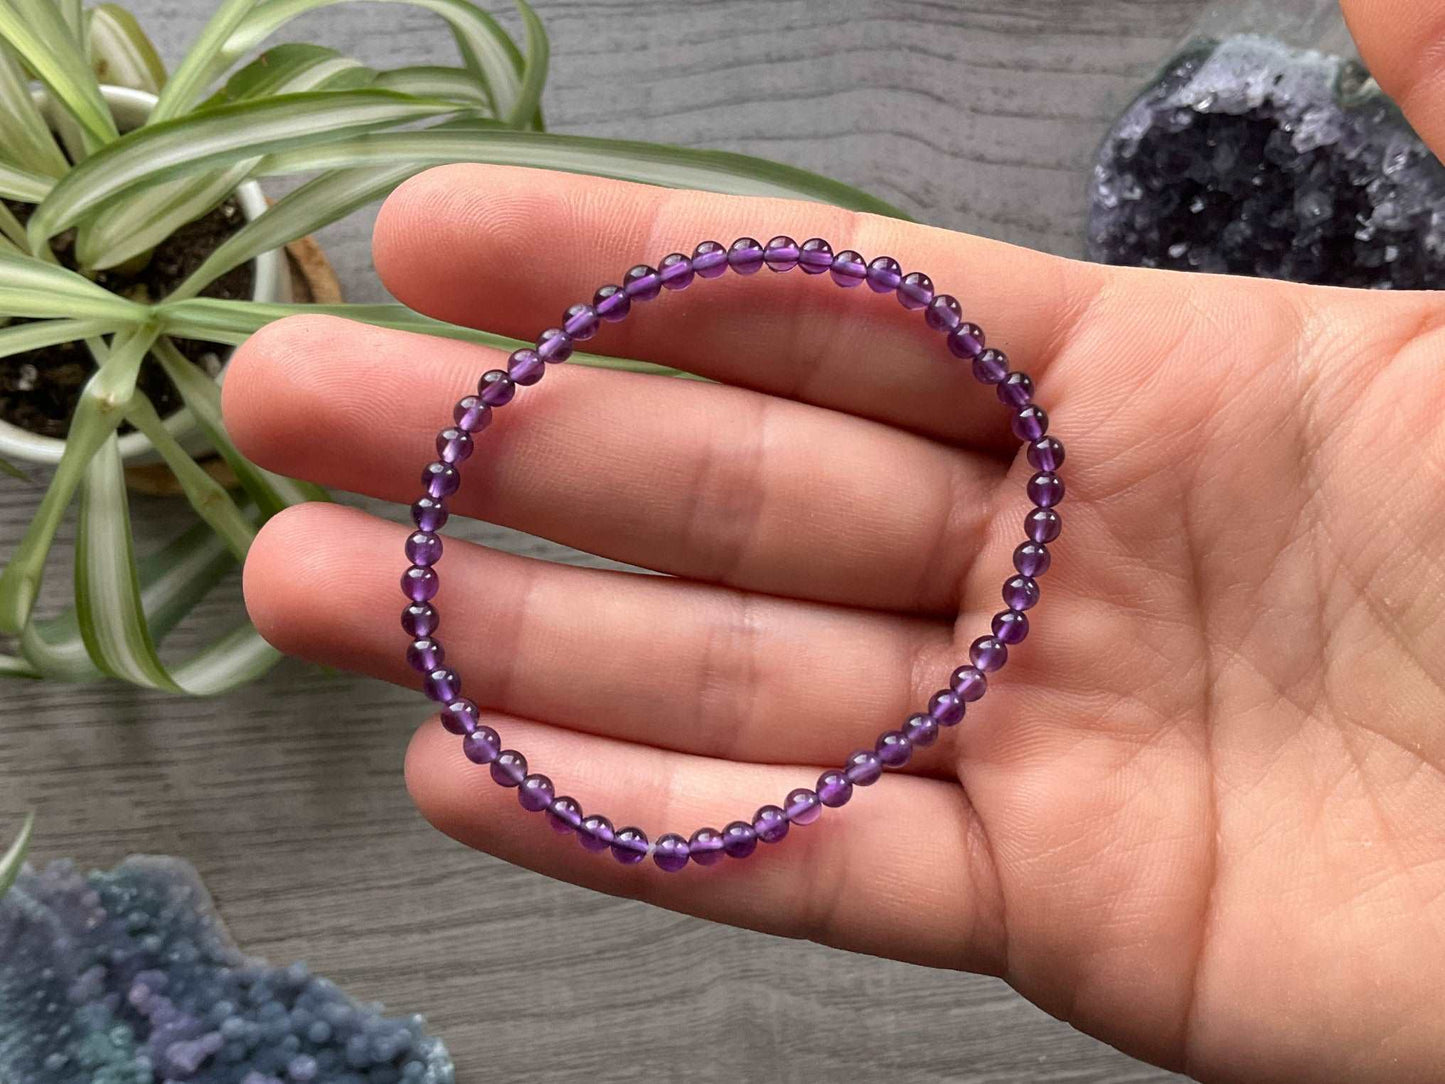 A close-up image of a bracelet made of smooth, round beads in a deep shade of purple. The beads are all the same size and made of amethyst, a type of quartz crystal known for its beautiful color and spiritual properties.